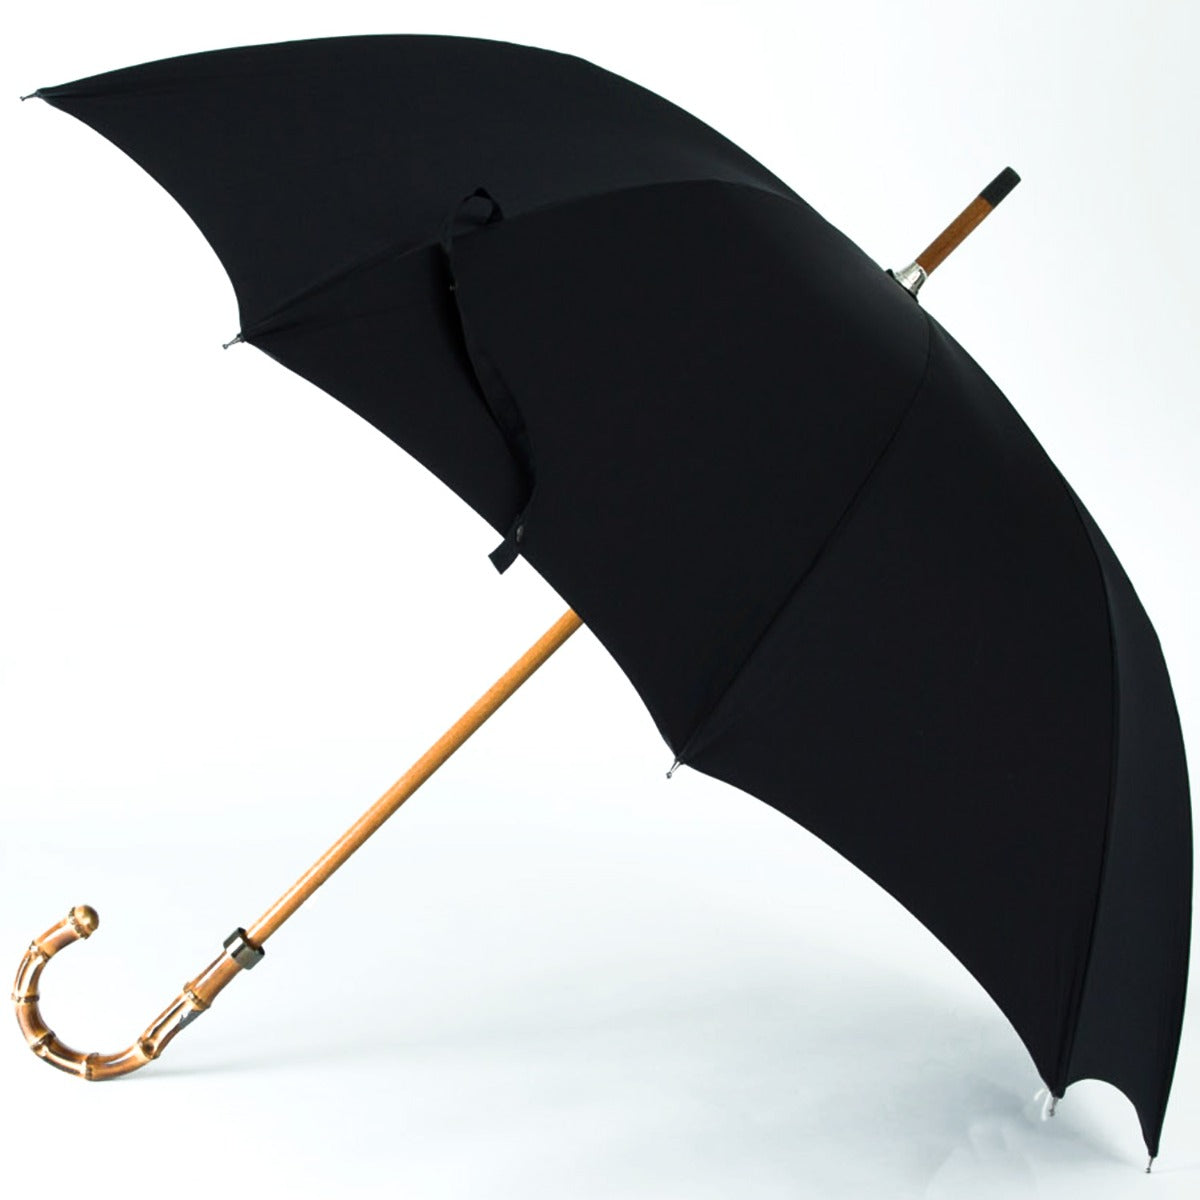 A Bamboo Handle Umbrella with Black Canopy and Italian design by KirbyAllison.com.